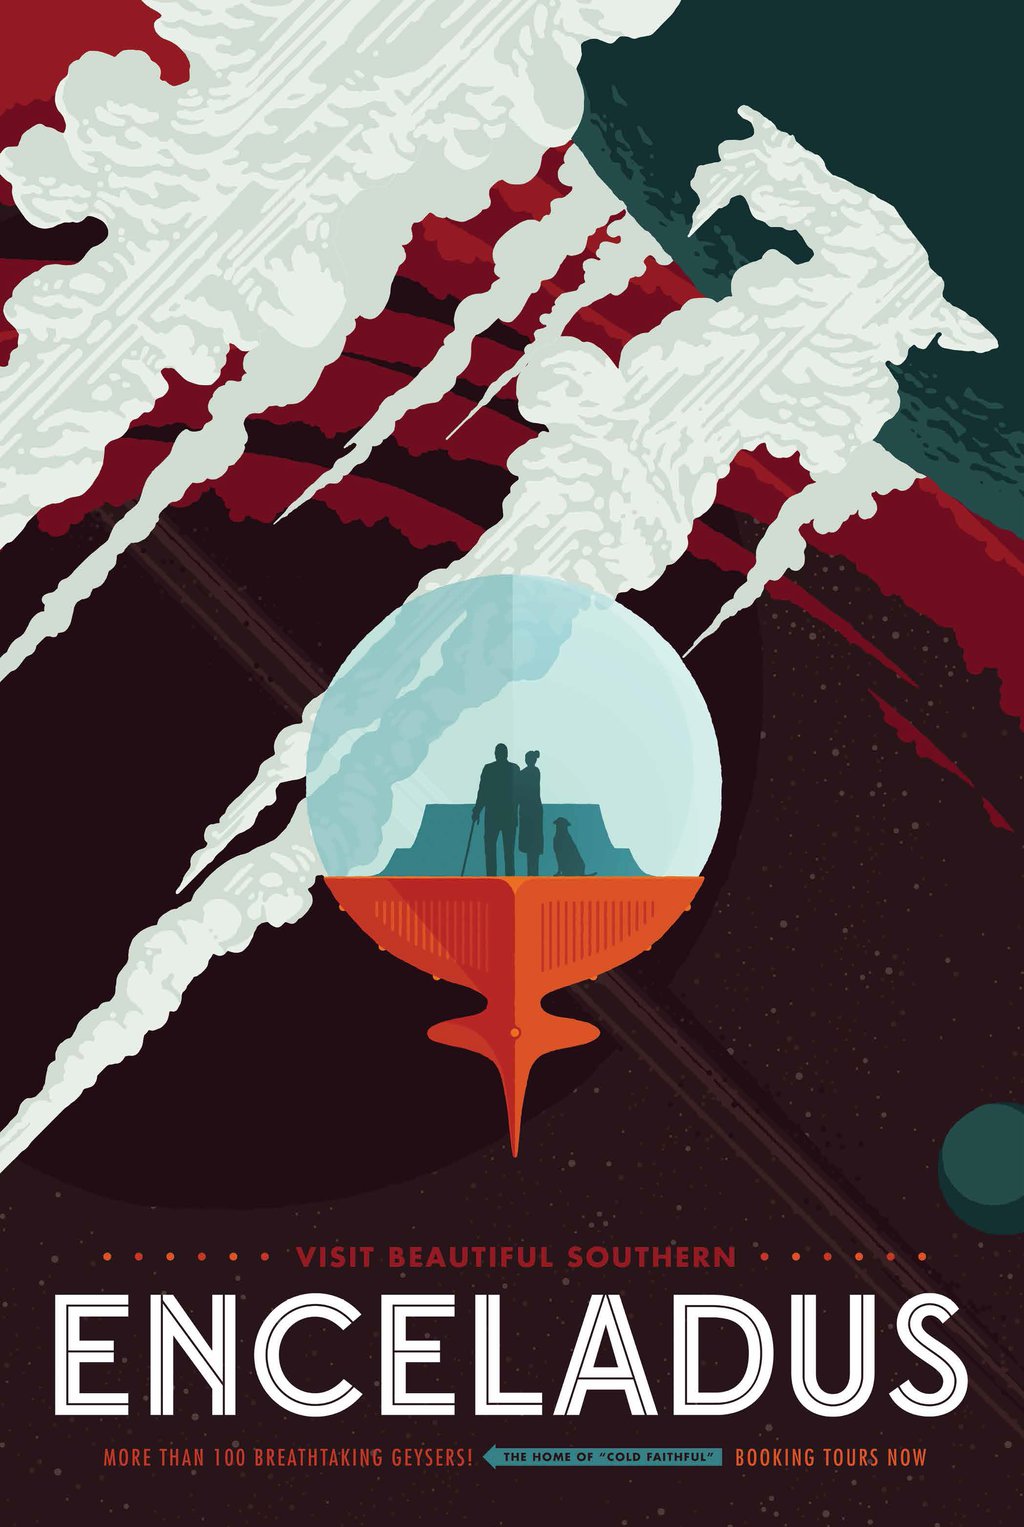 Enceladus - JPL Travel Poster - Visions of the Future Collection